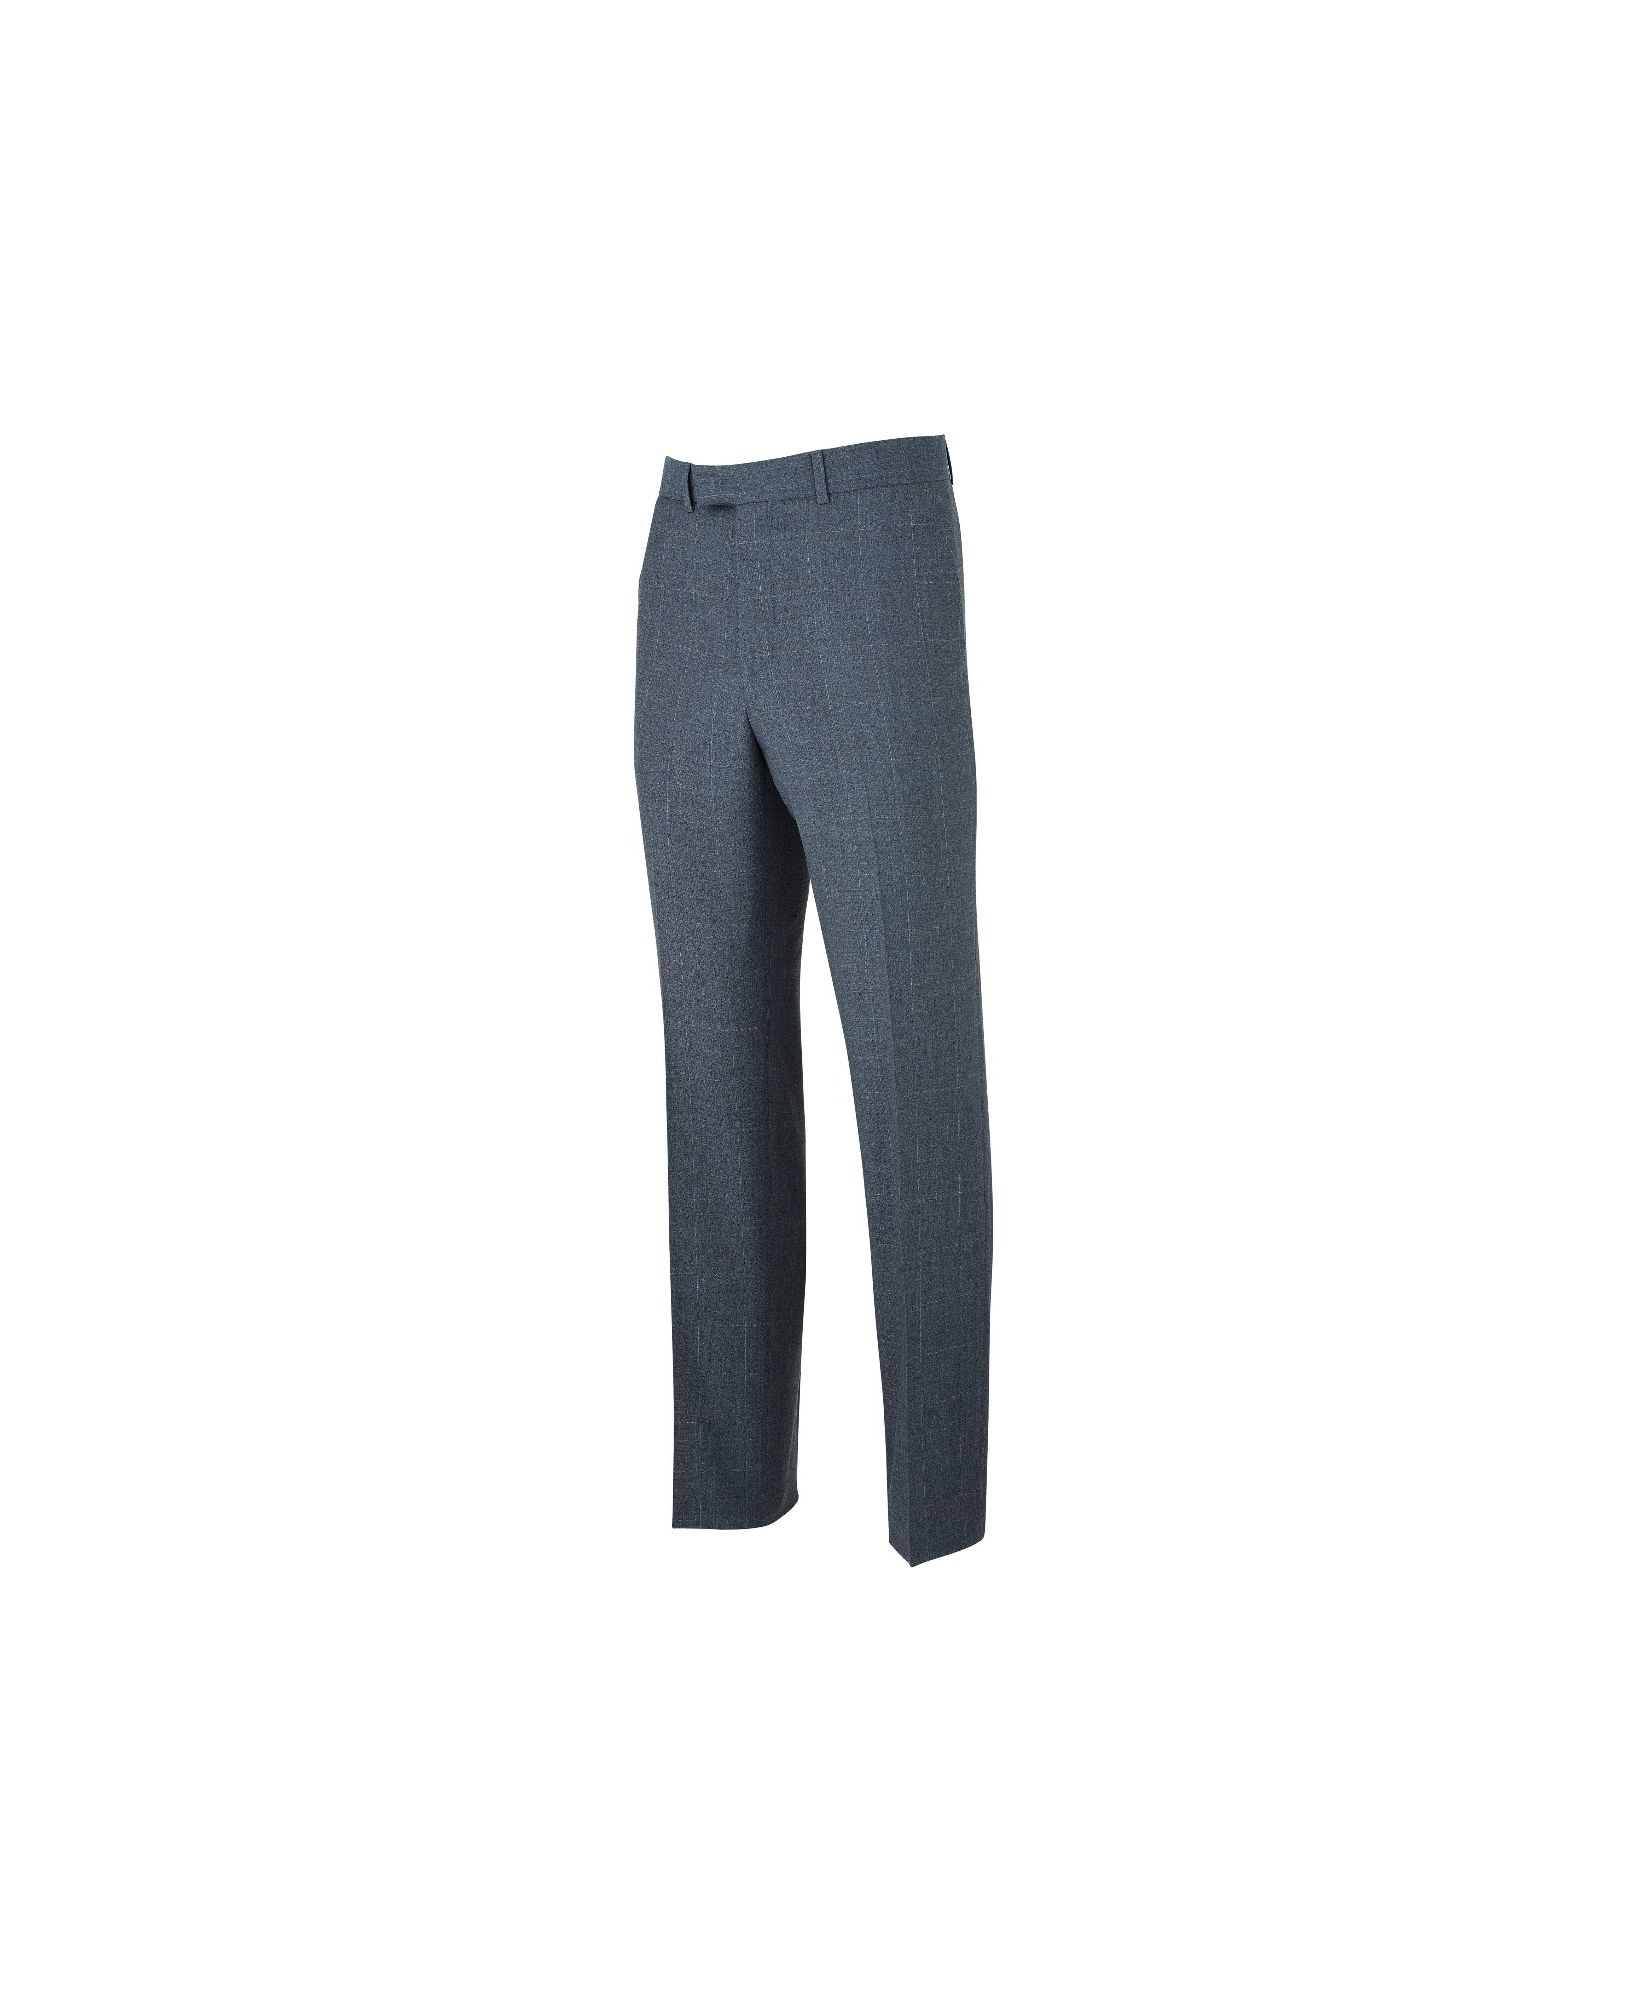 Grey Check Suit Trousers 30